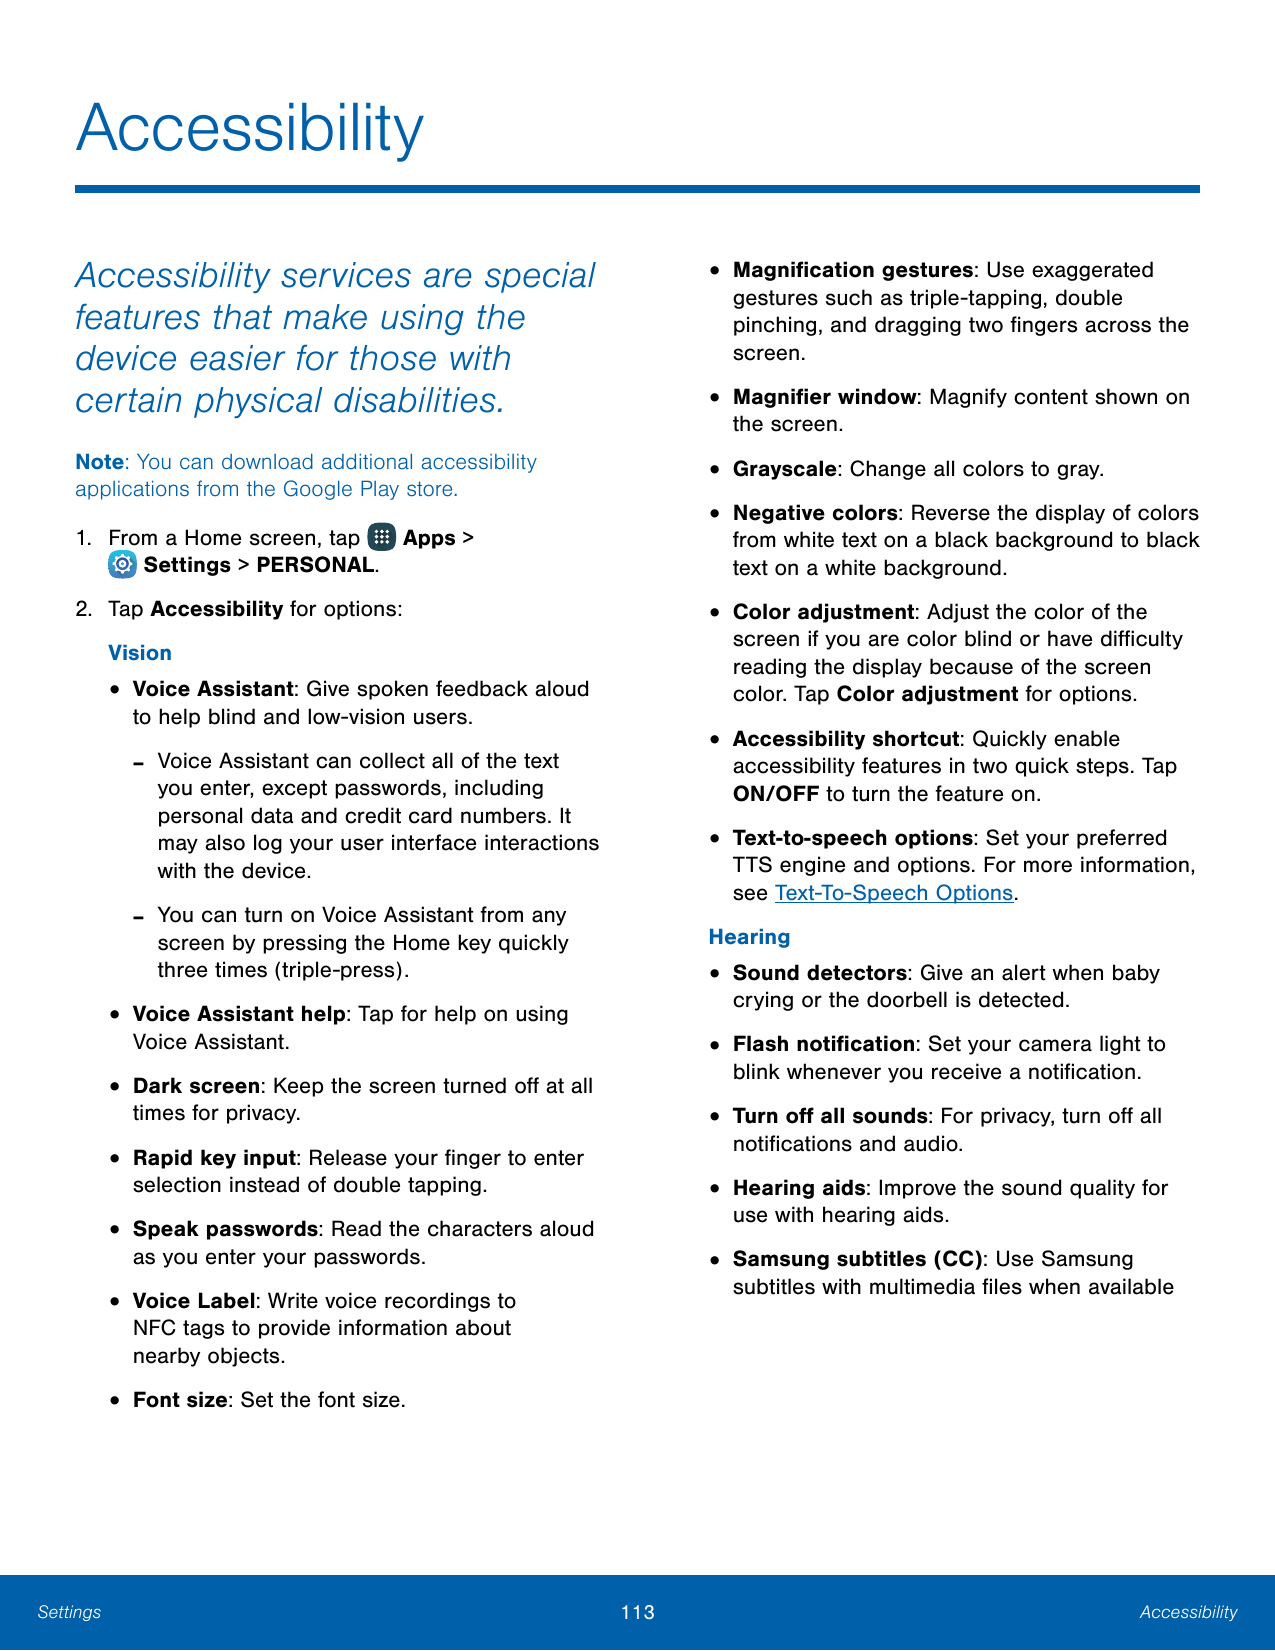 AccessibilityAccessibility services are specialfeatures that make using thedevice easier for those withcertain physical disabili